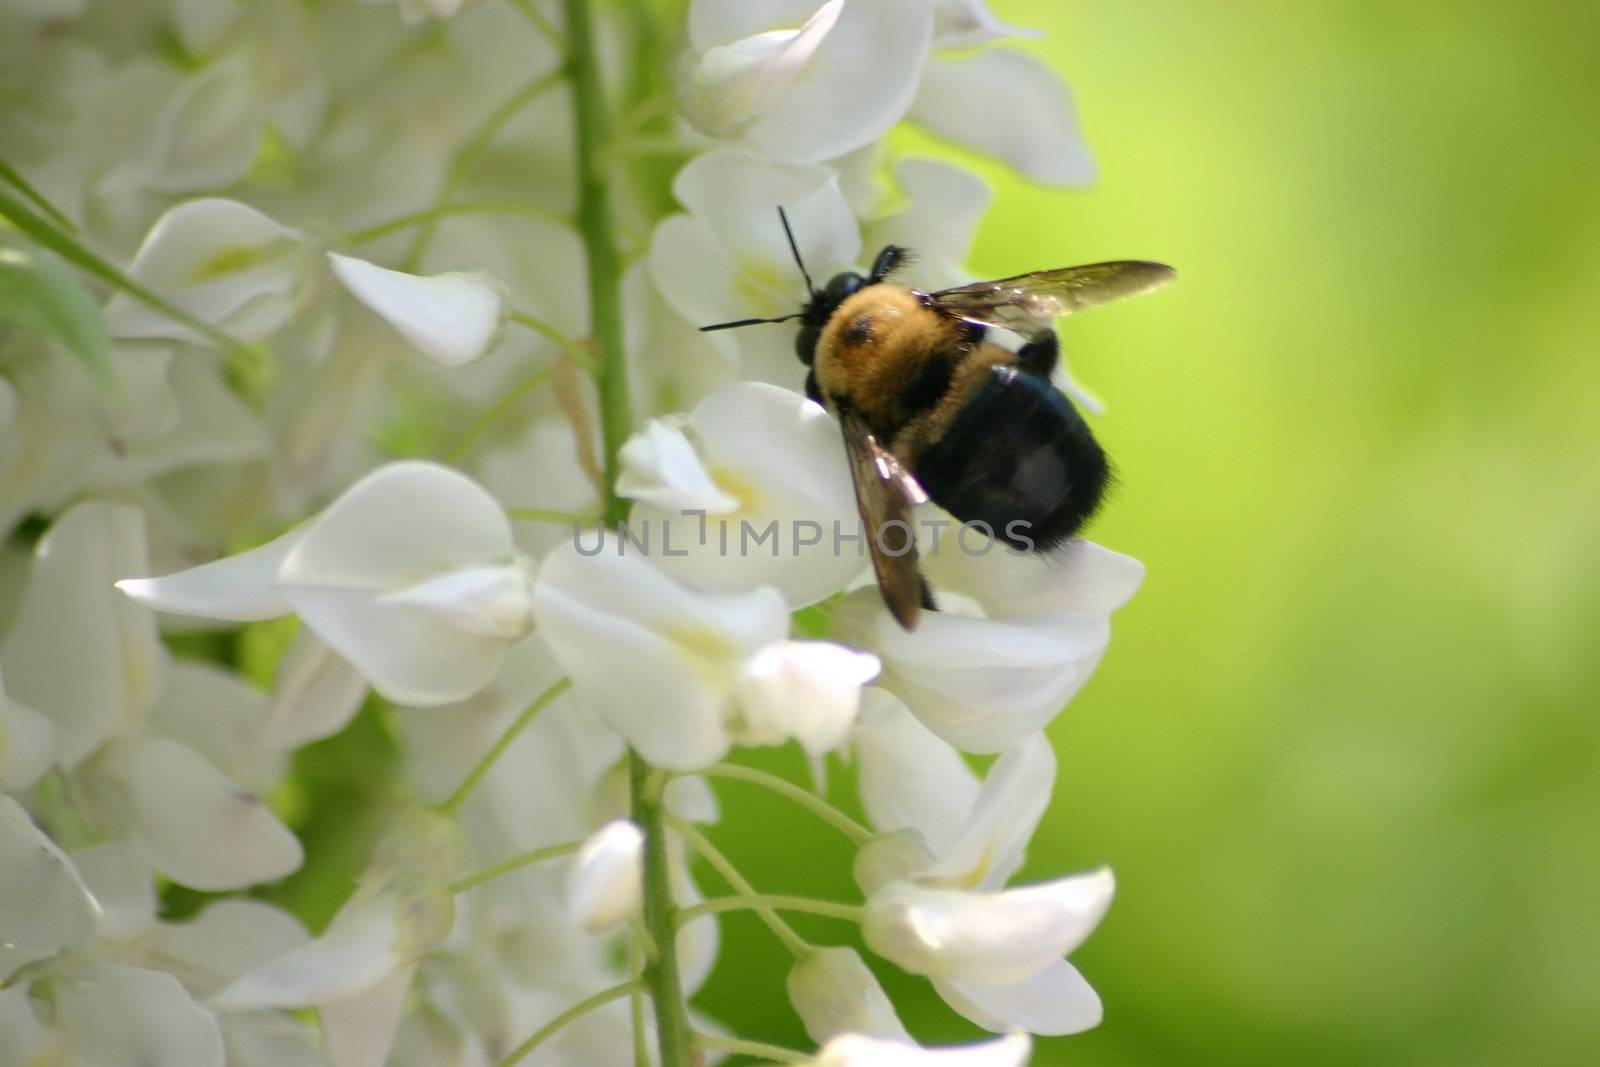 A fat honey bee extracting nectar from a wisteria flower